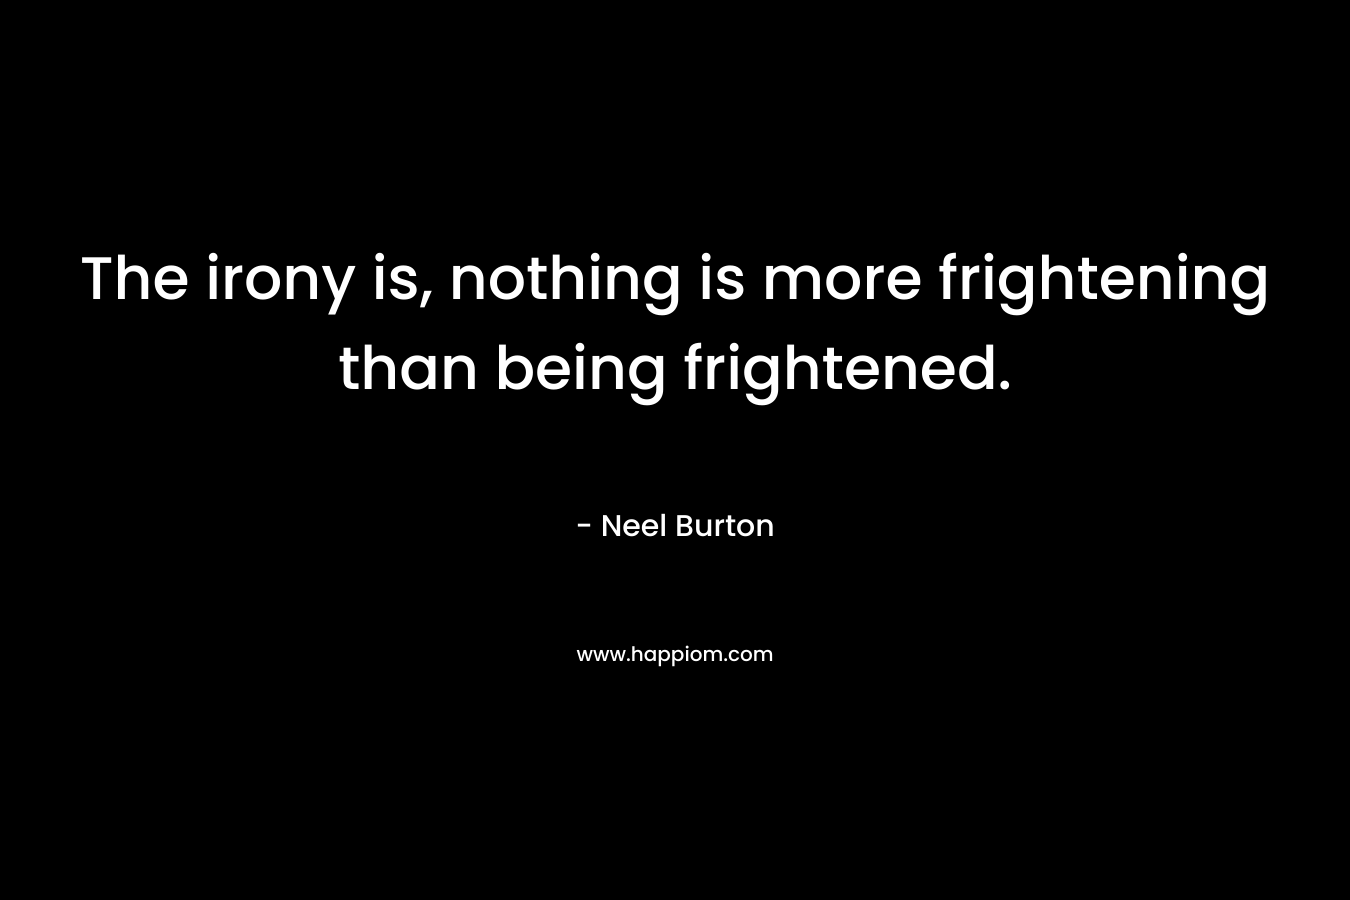 The irony is, nothing is more frightening than being frightened.